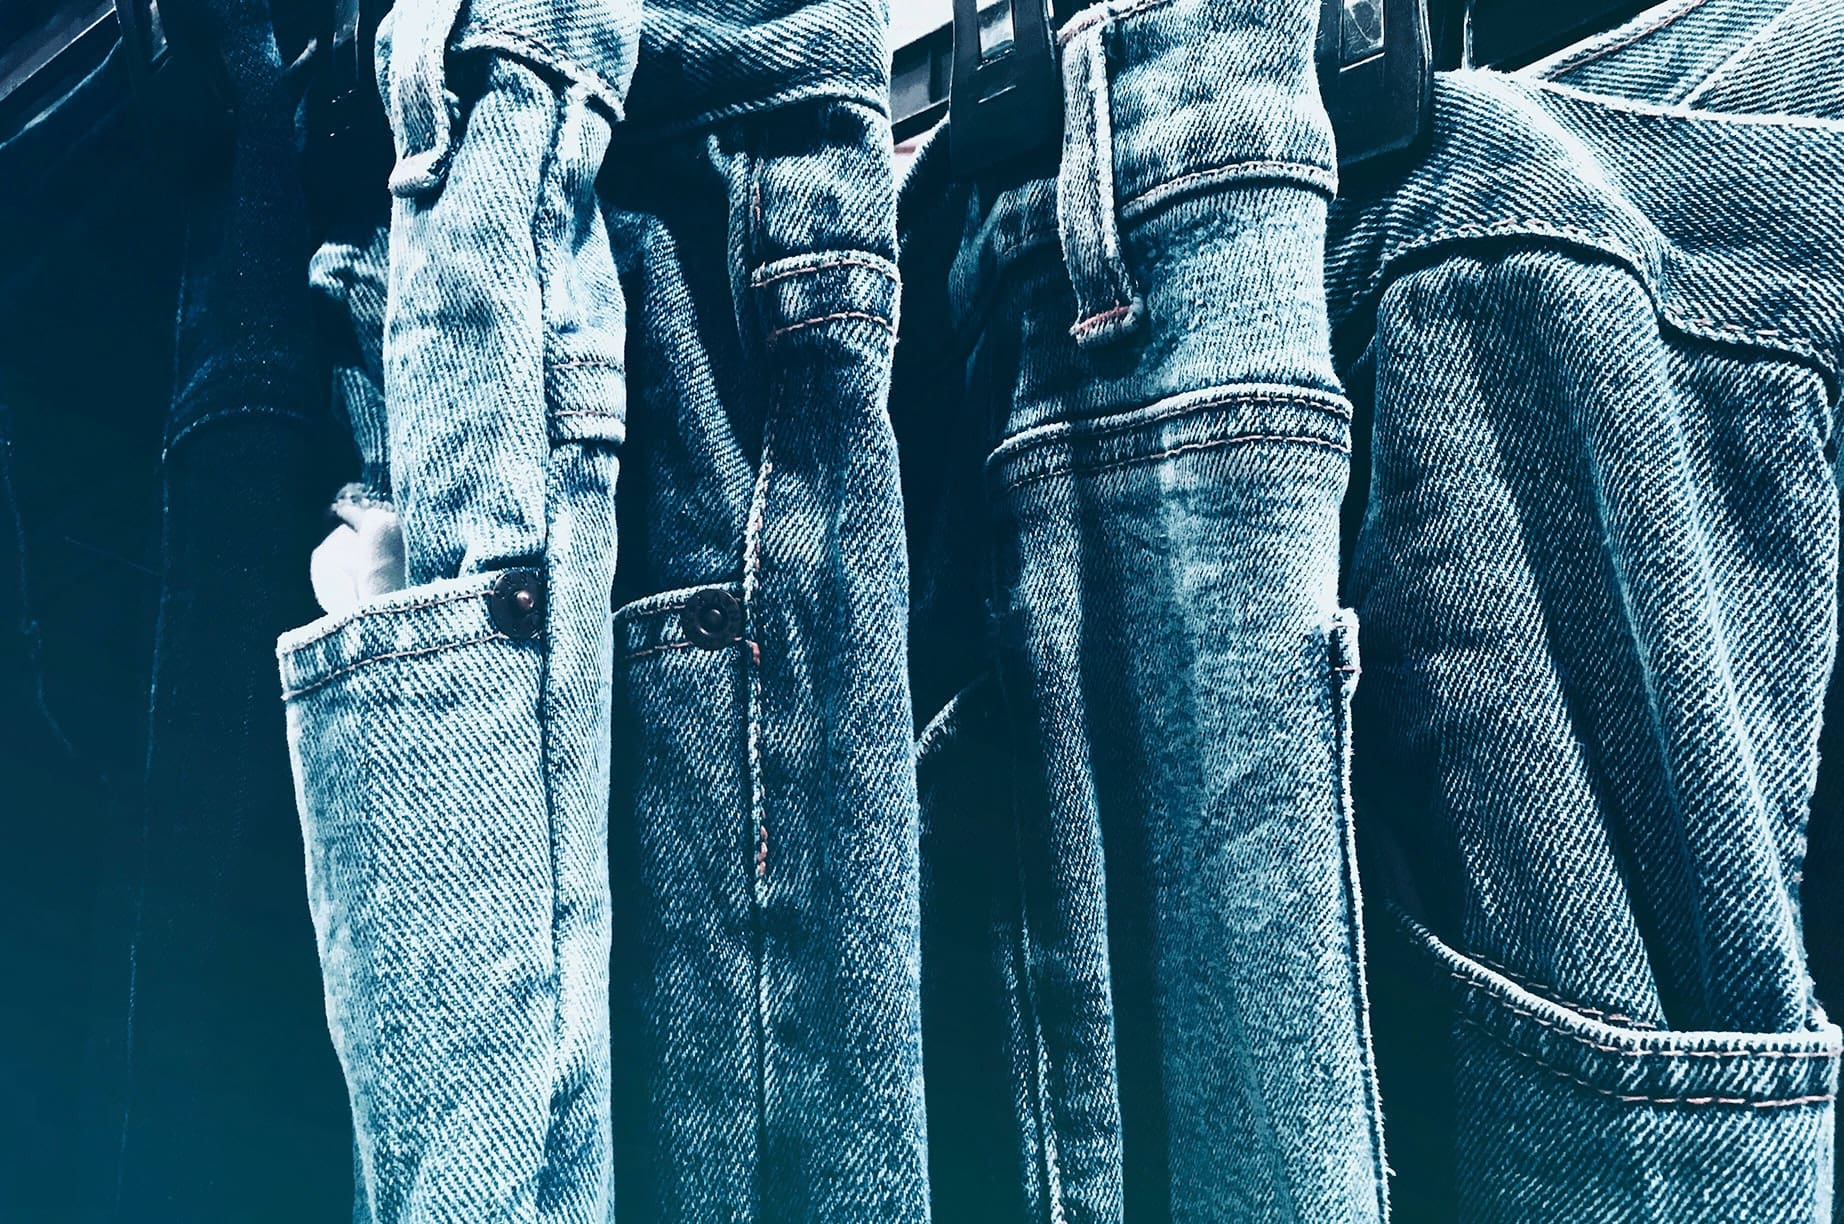 Denim Jeans Market Size And Share Analysis Report, 2030